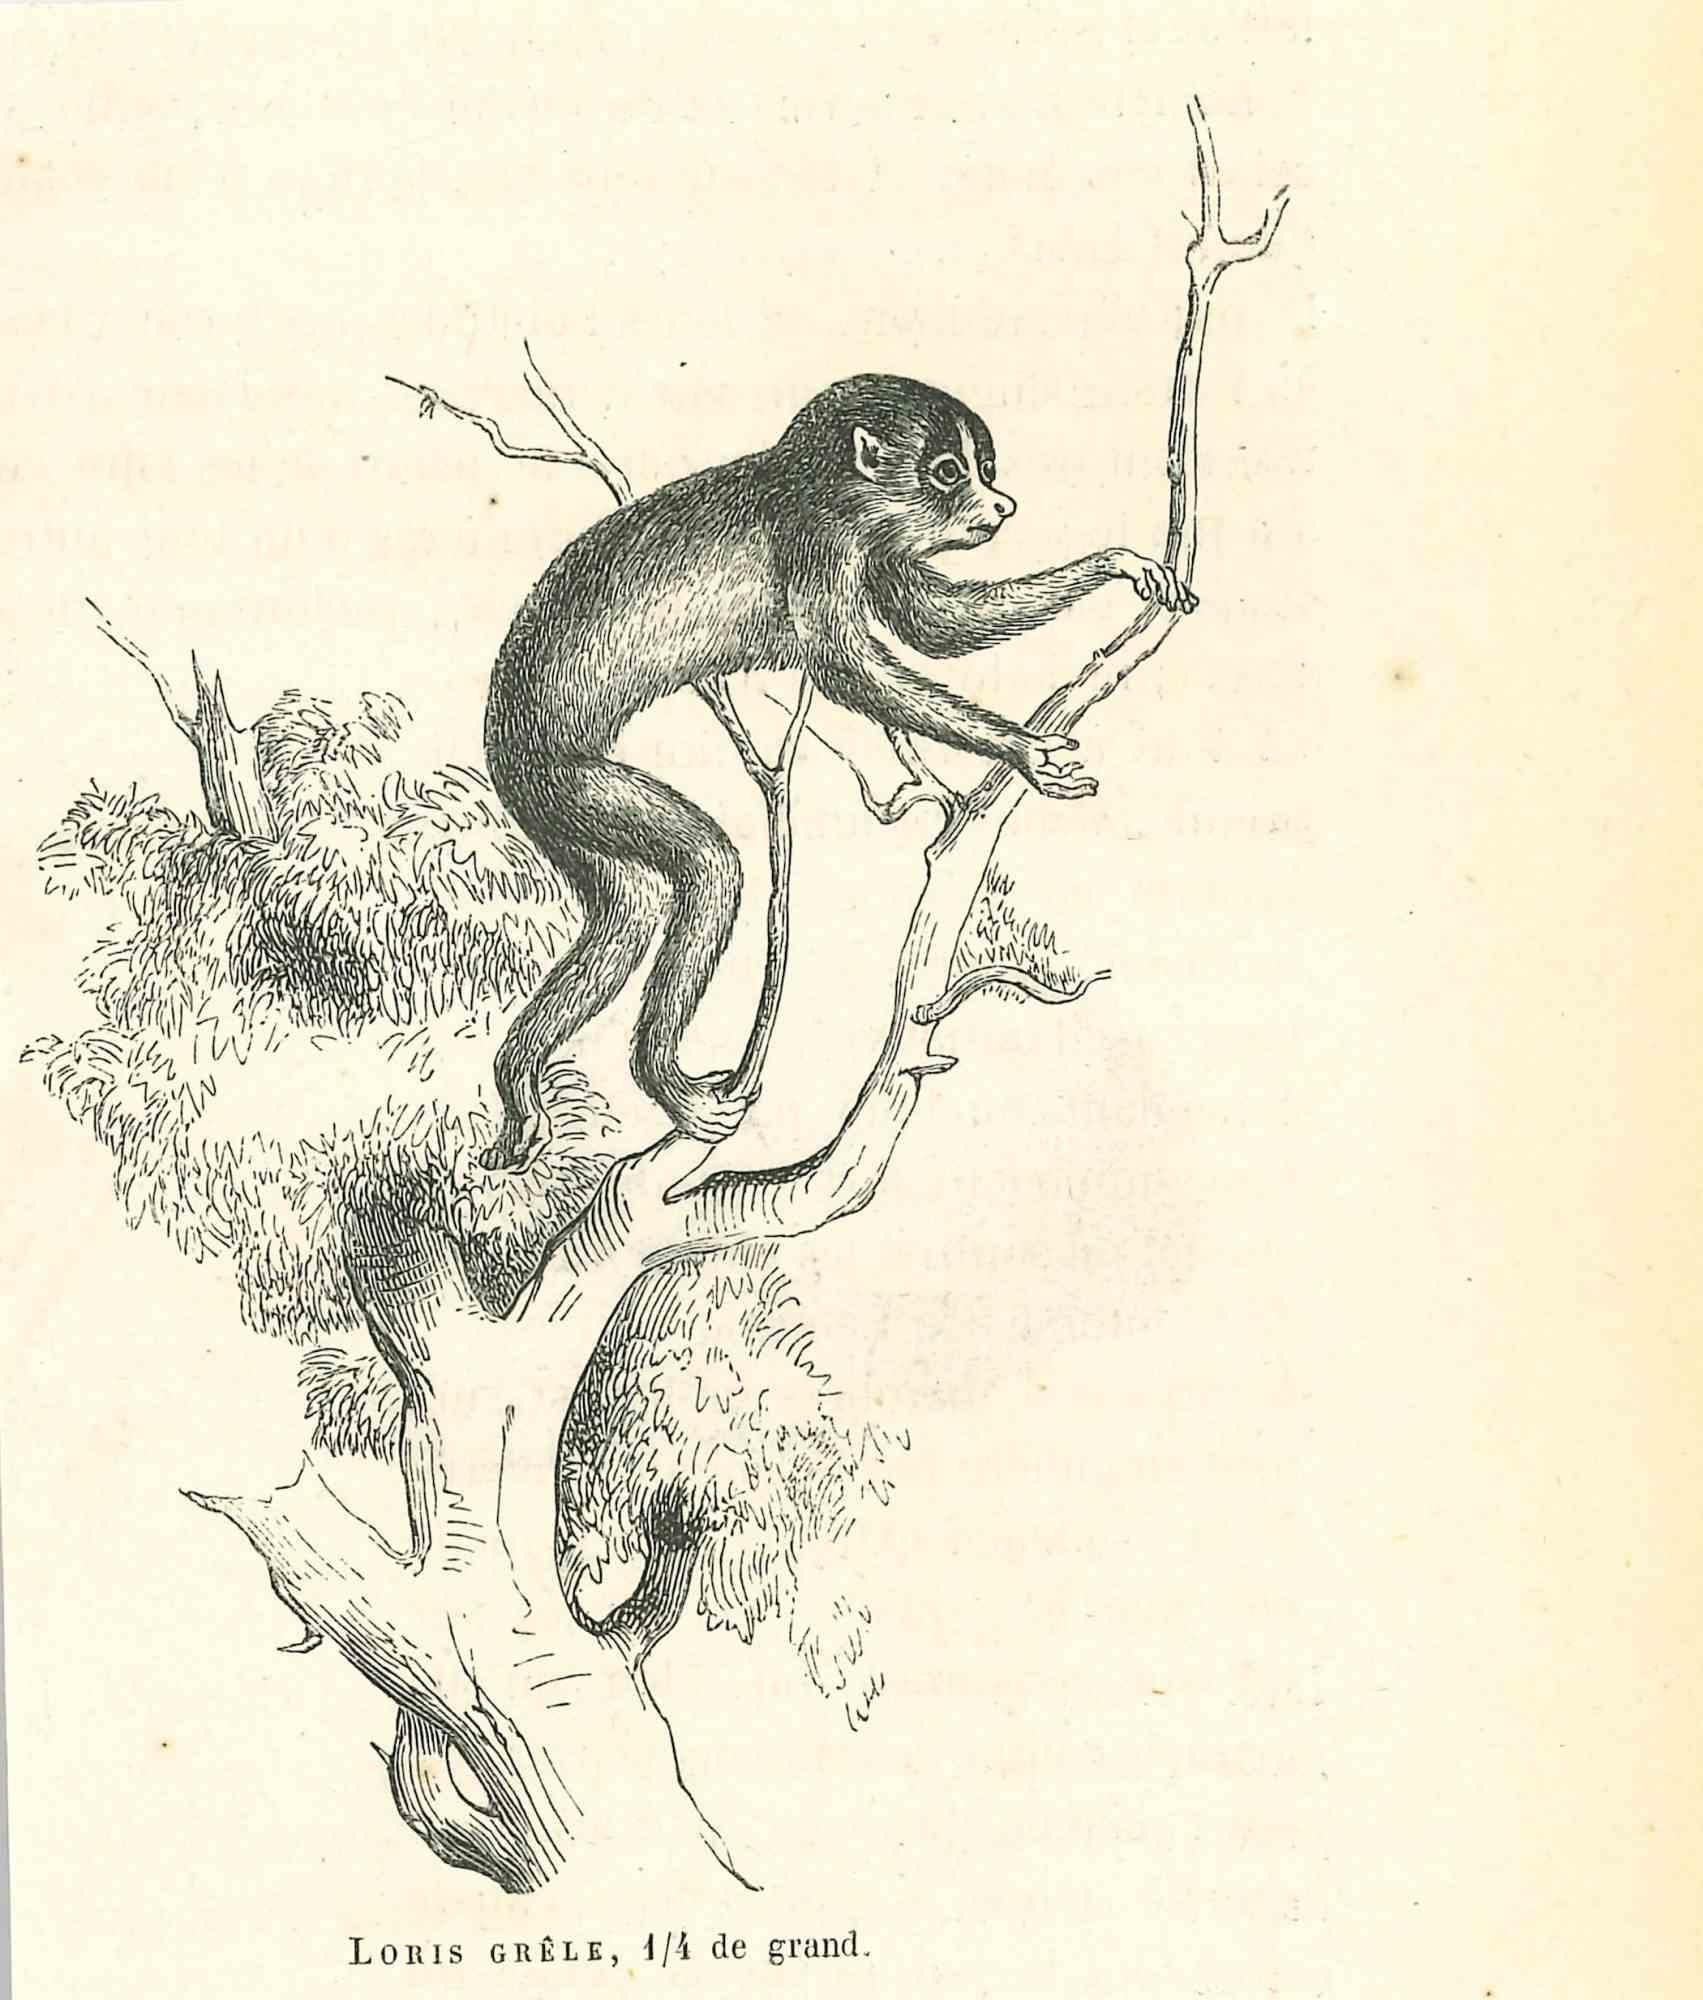 The Monkey - Original Lithograph by Paul Gervais - 1854